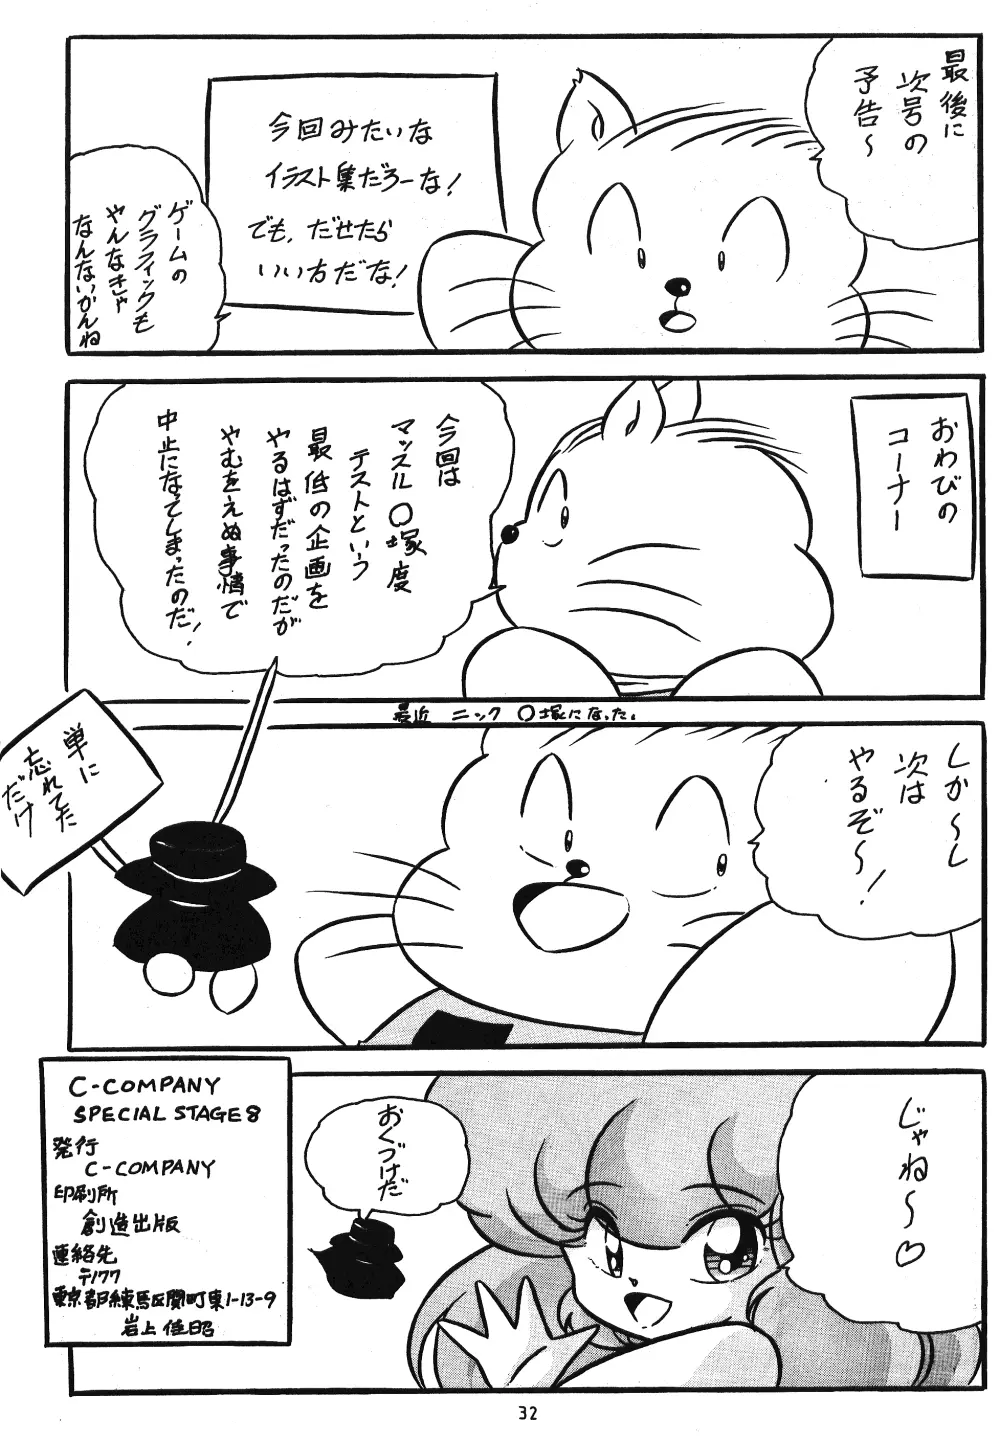 C-COMPANY SPECIAL STAGE 8 Page.33